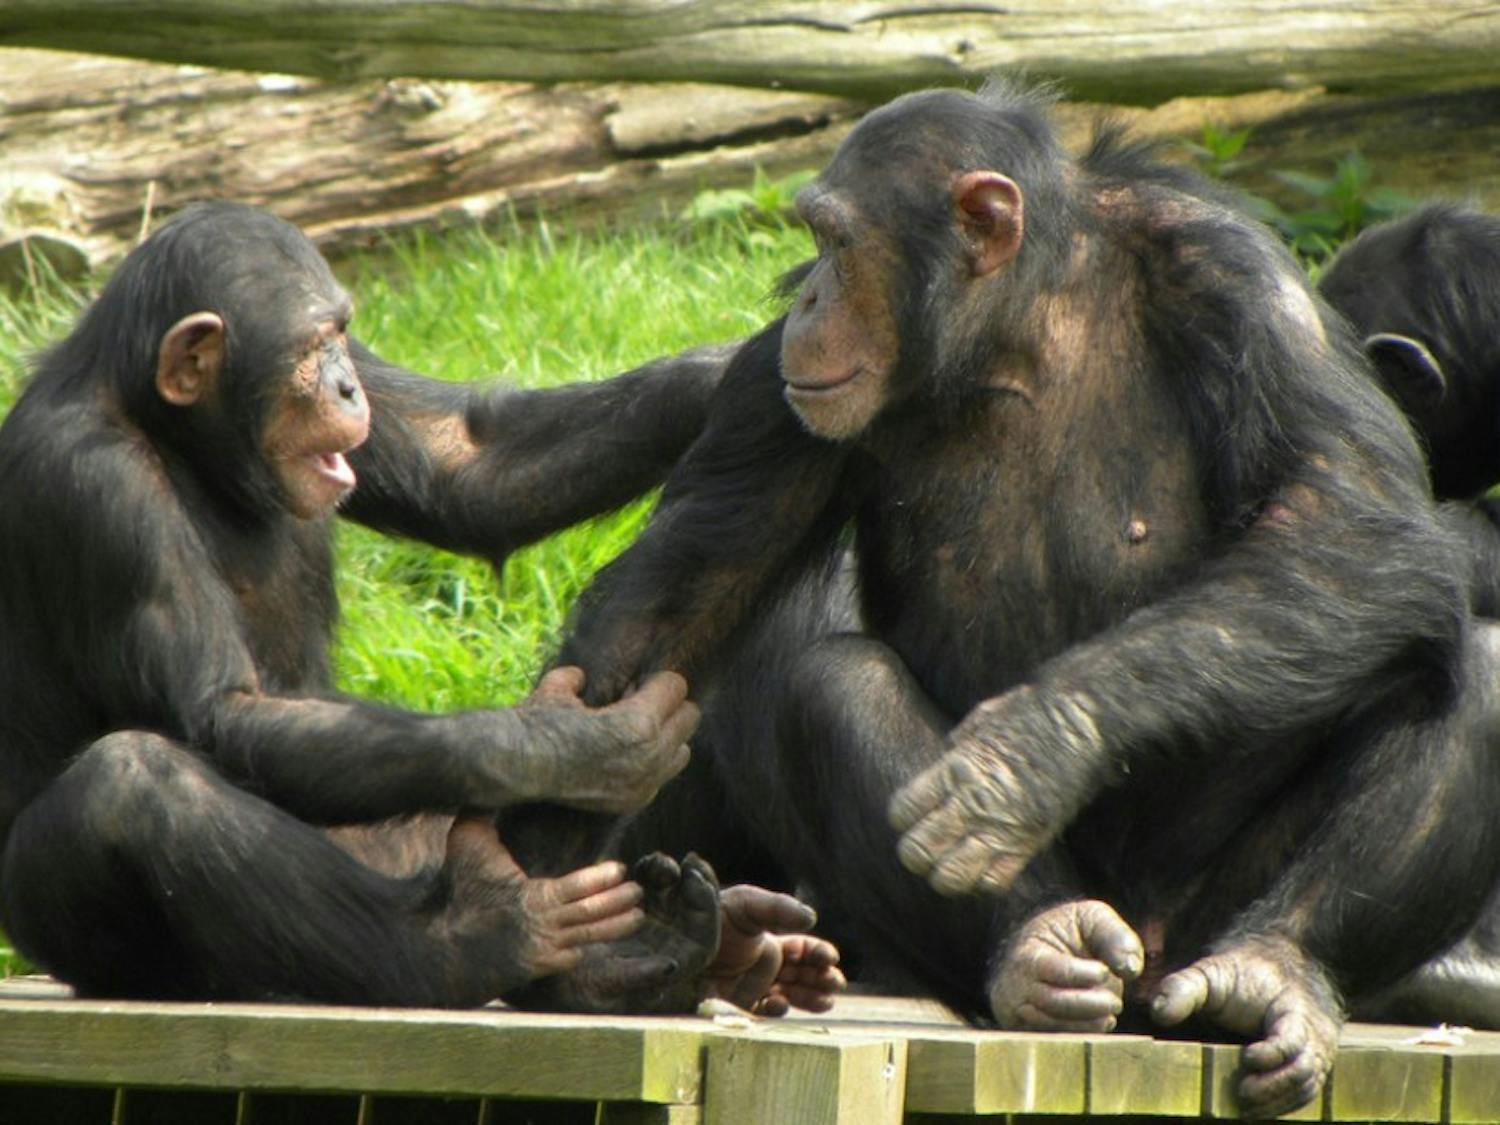 The study showed that apes'&nbsp;understanding of others as mental beings is more complex than scientists previously thought.&nbsp;